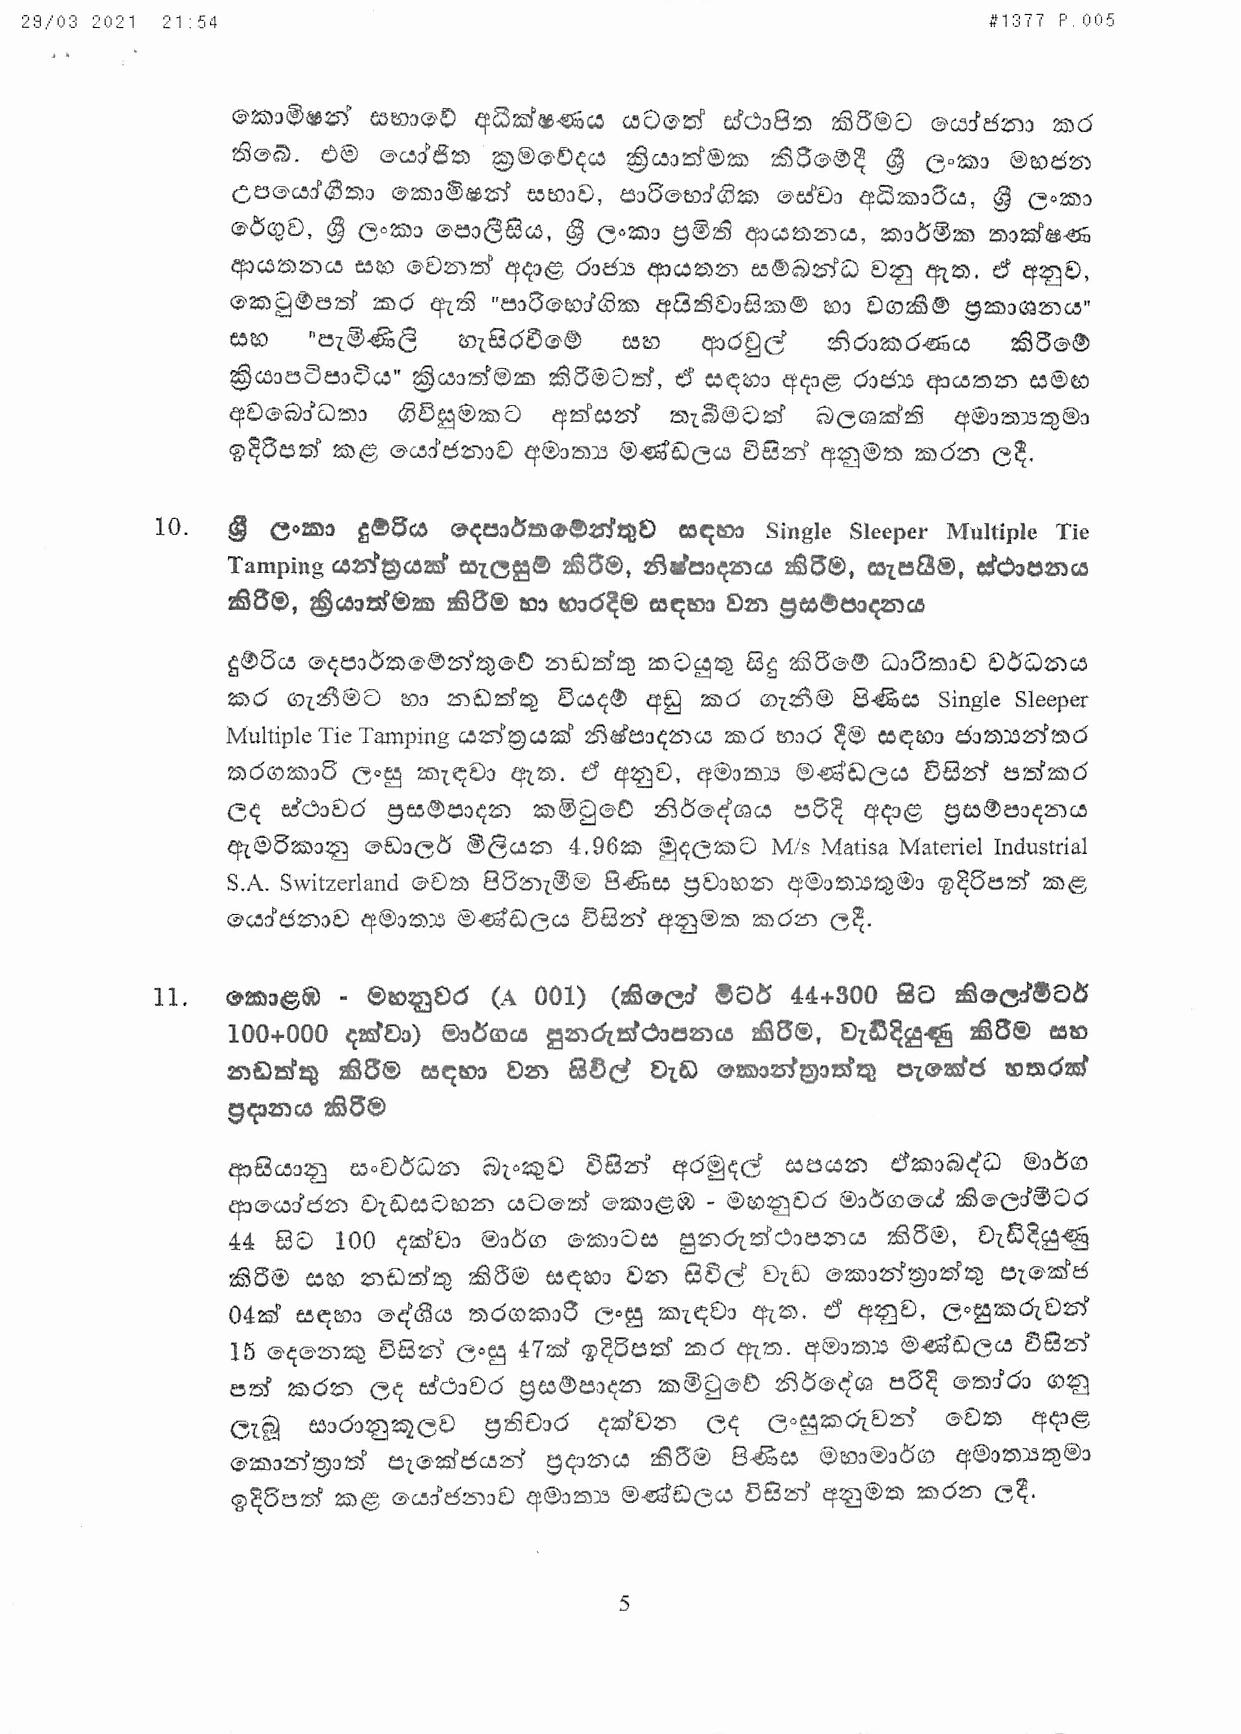 Cabinet Decision on 29.03.2021 Sinhala page 005